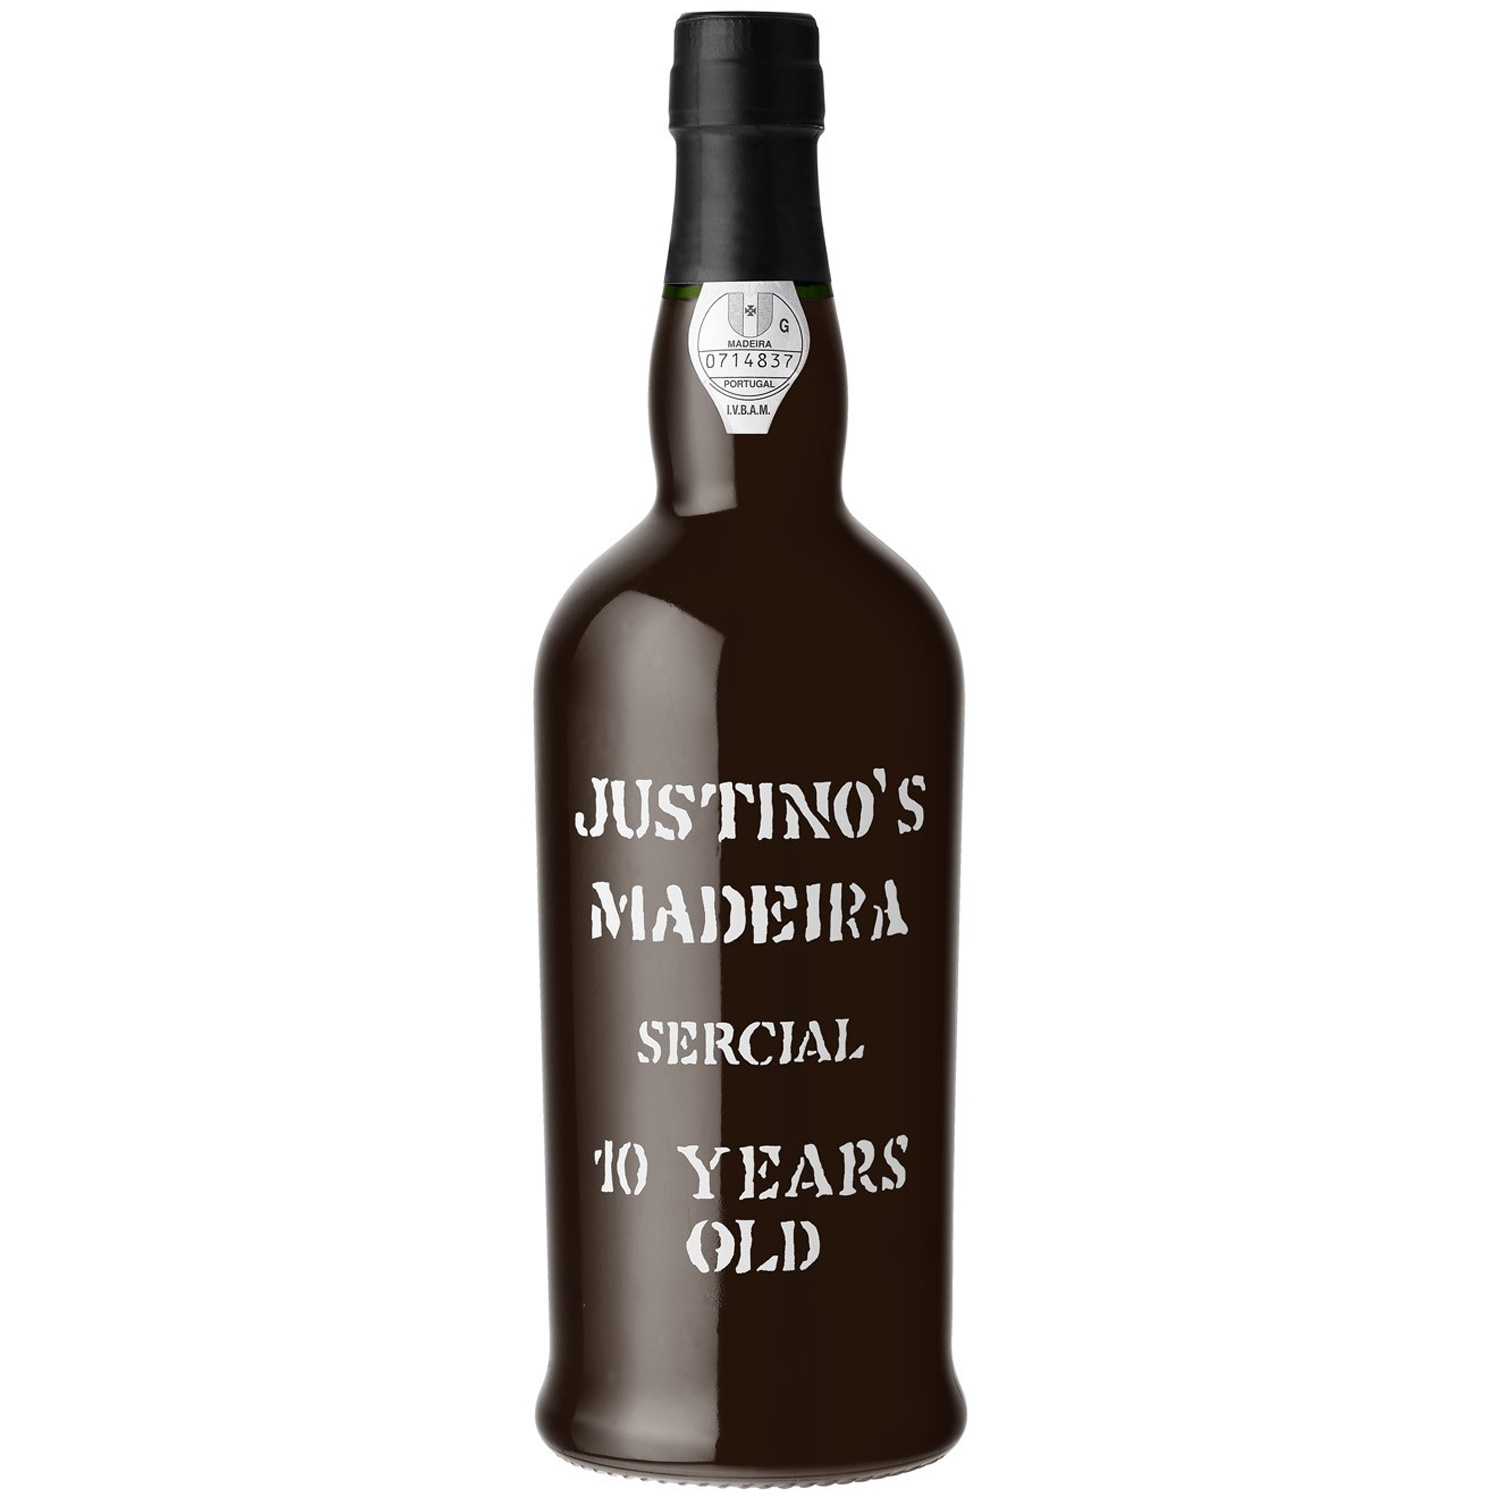 Justino's Madeira Wein Sercial Dry 10 Years Old